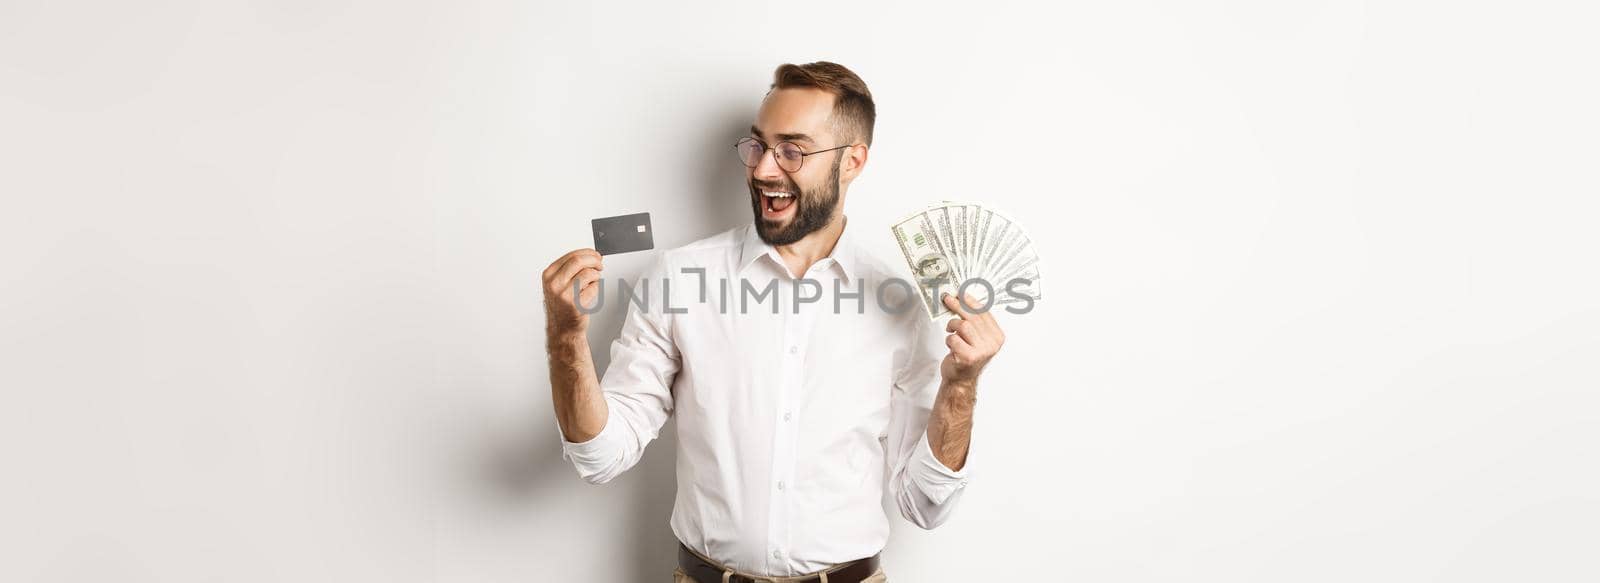 Excited businessman holding money and looking at credit card, standing over white background.